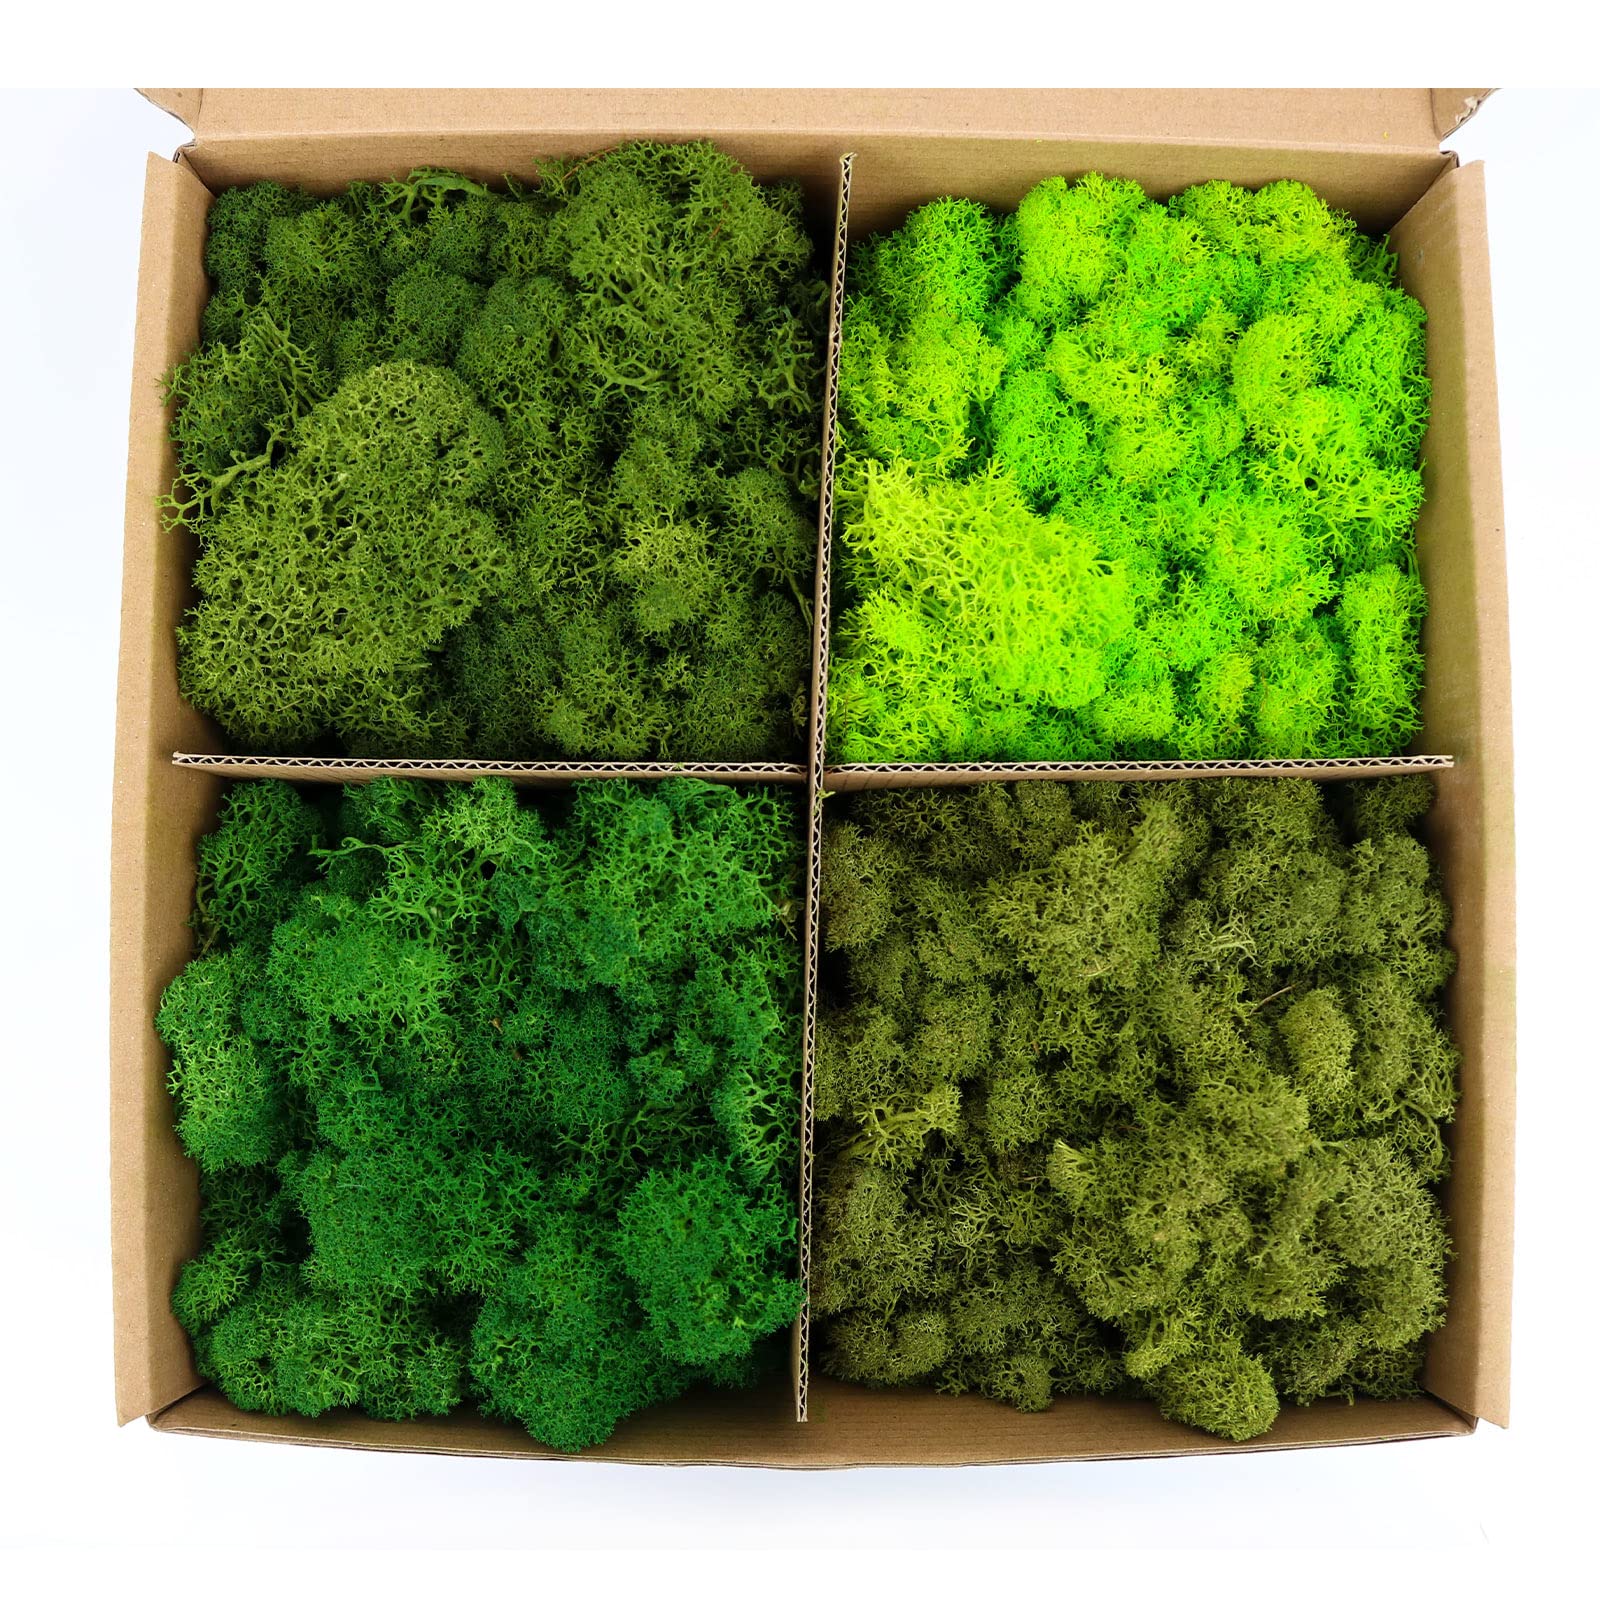 Preserved Moss 4 Color Reindeer Moss, Total 14OZ Each Color 3.5OZ, Colored  Moss for Moss Crafts, Moss Wall, Home Office Artistic Decoration Forest  Green/Yellow Green/Leaves Green/Grass Green color mix green